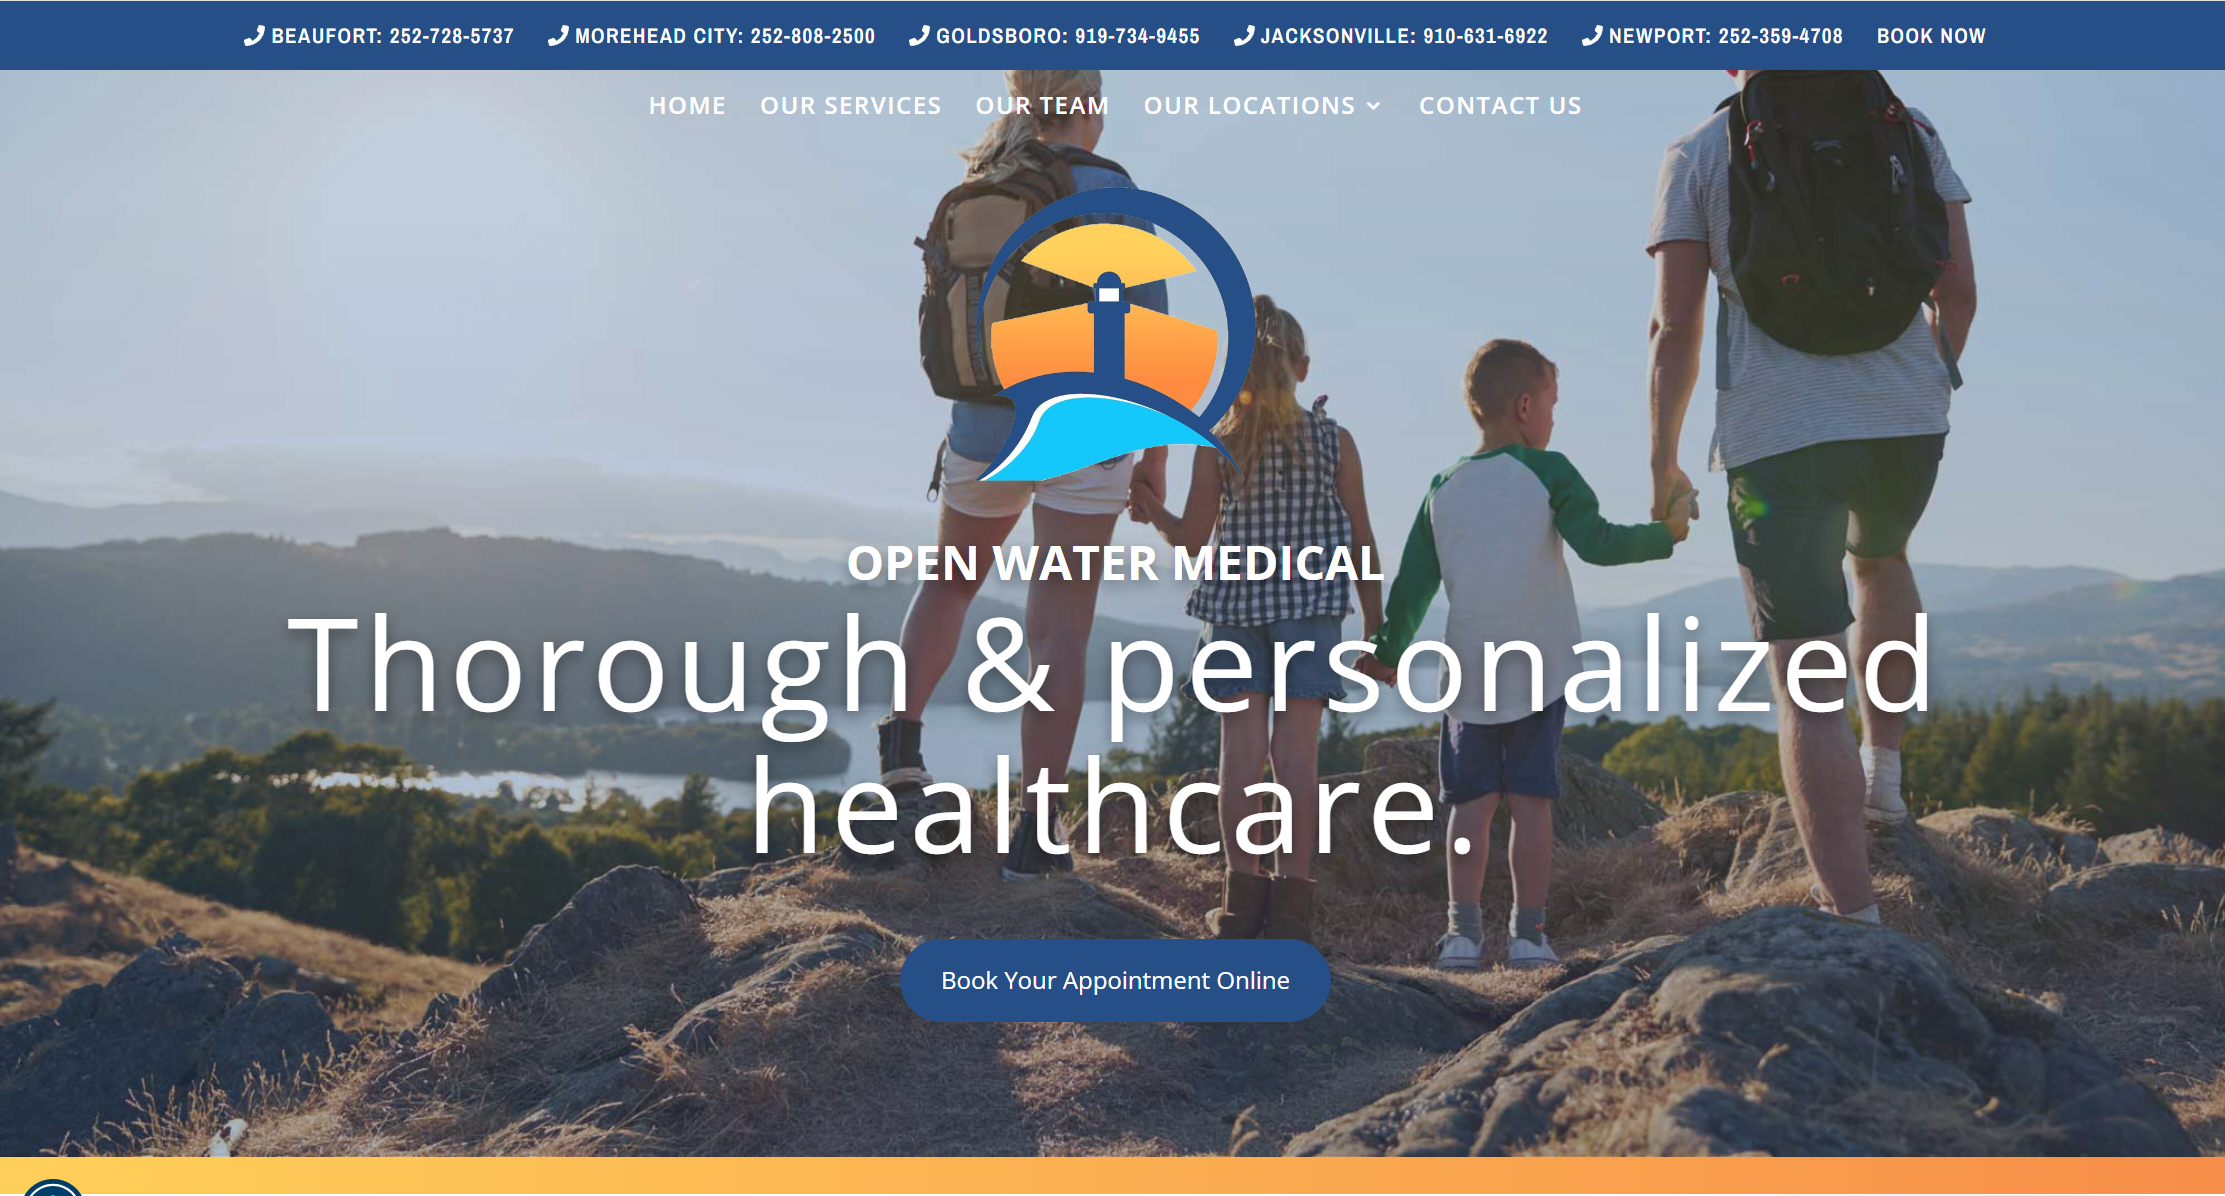 Open Water Medical